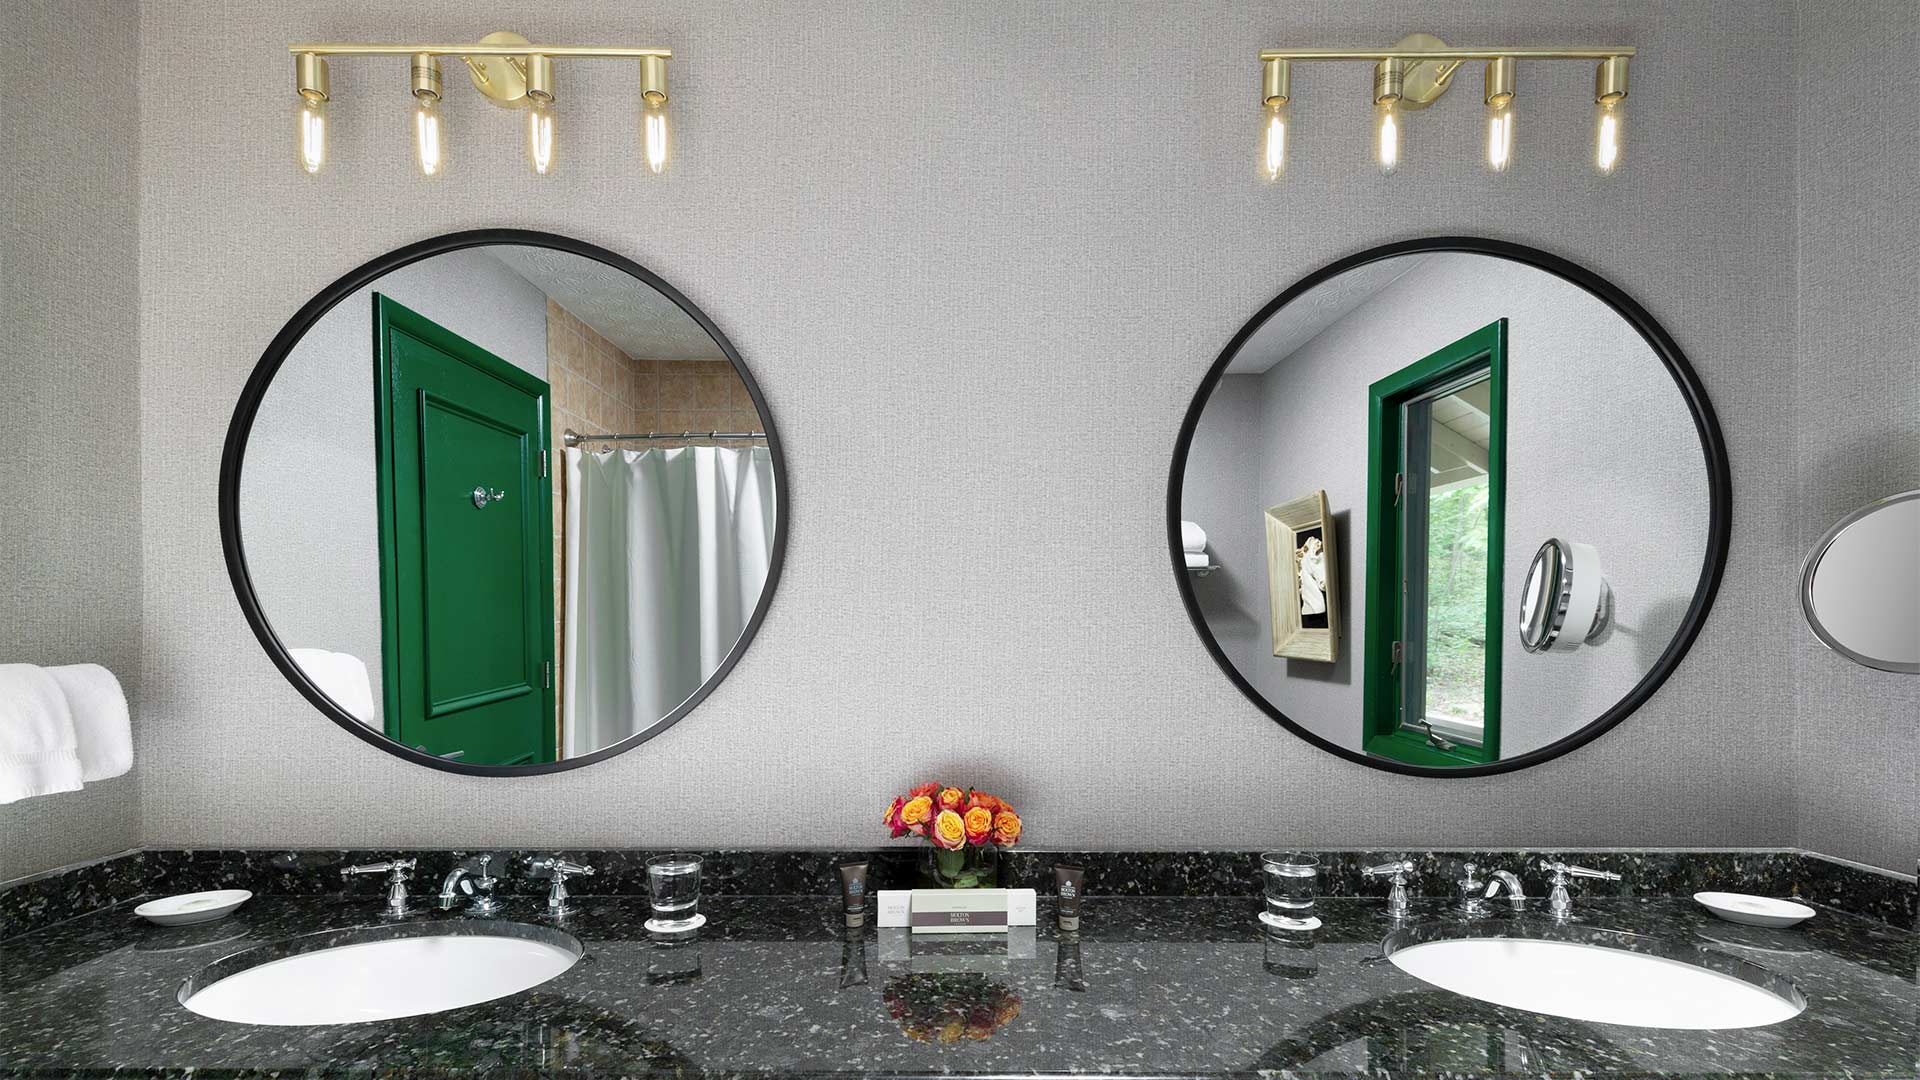 detail shot of a bathroom. There are two sinks with a sleek dark grey countertop. There are circular mirrors above each sink.